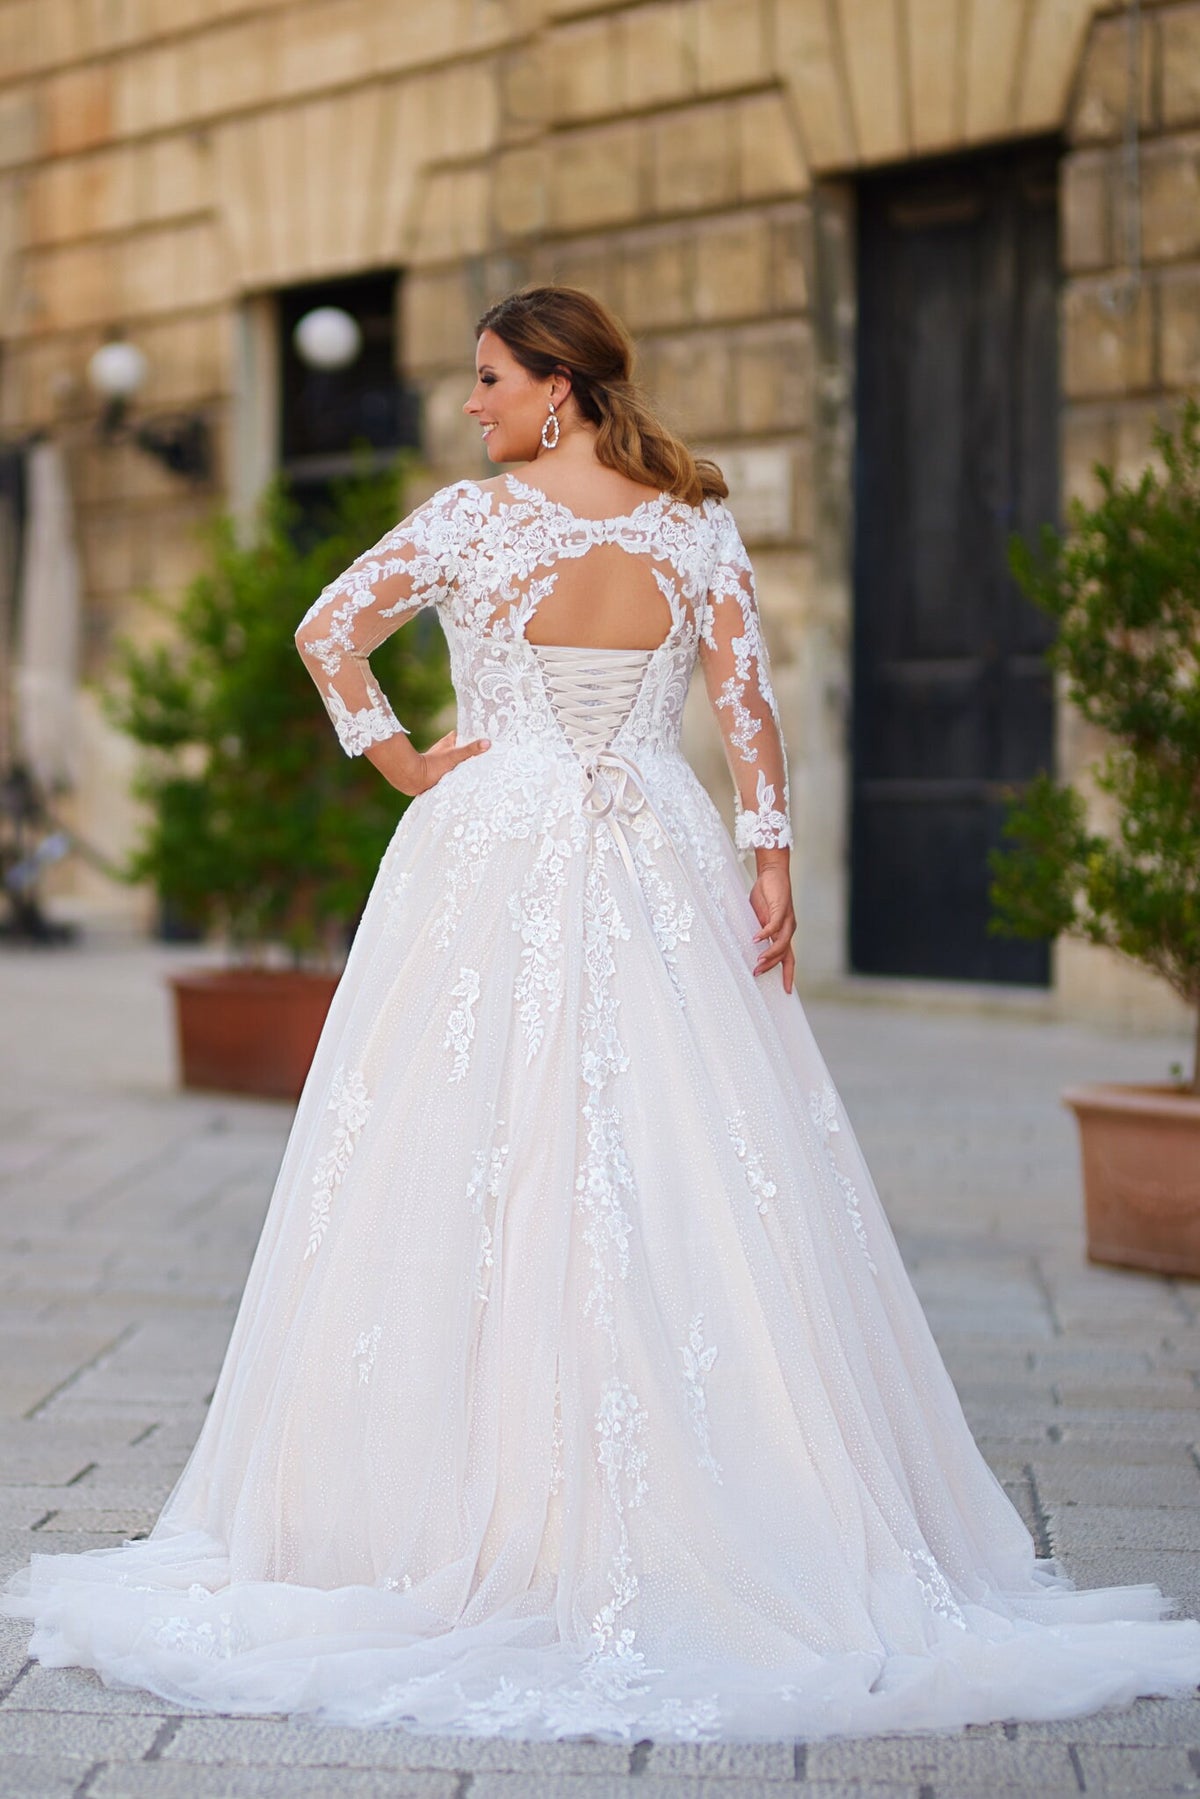 Luxurious Elegant Aline Wedding Dress Bridal Gown Illusion Lace Neckline Long Sleeves Corset Back Plus Size Tattoo Lace Full Tulle Skirt